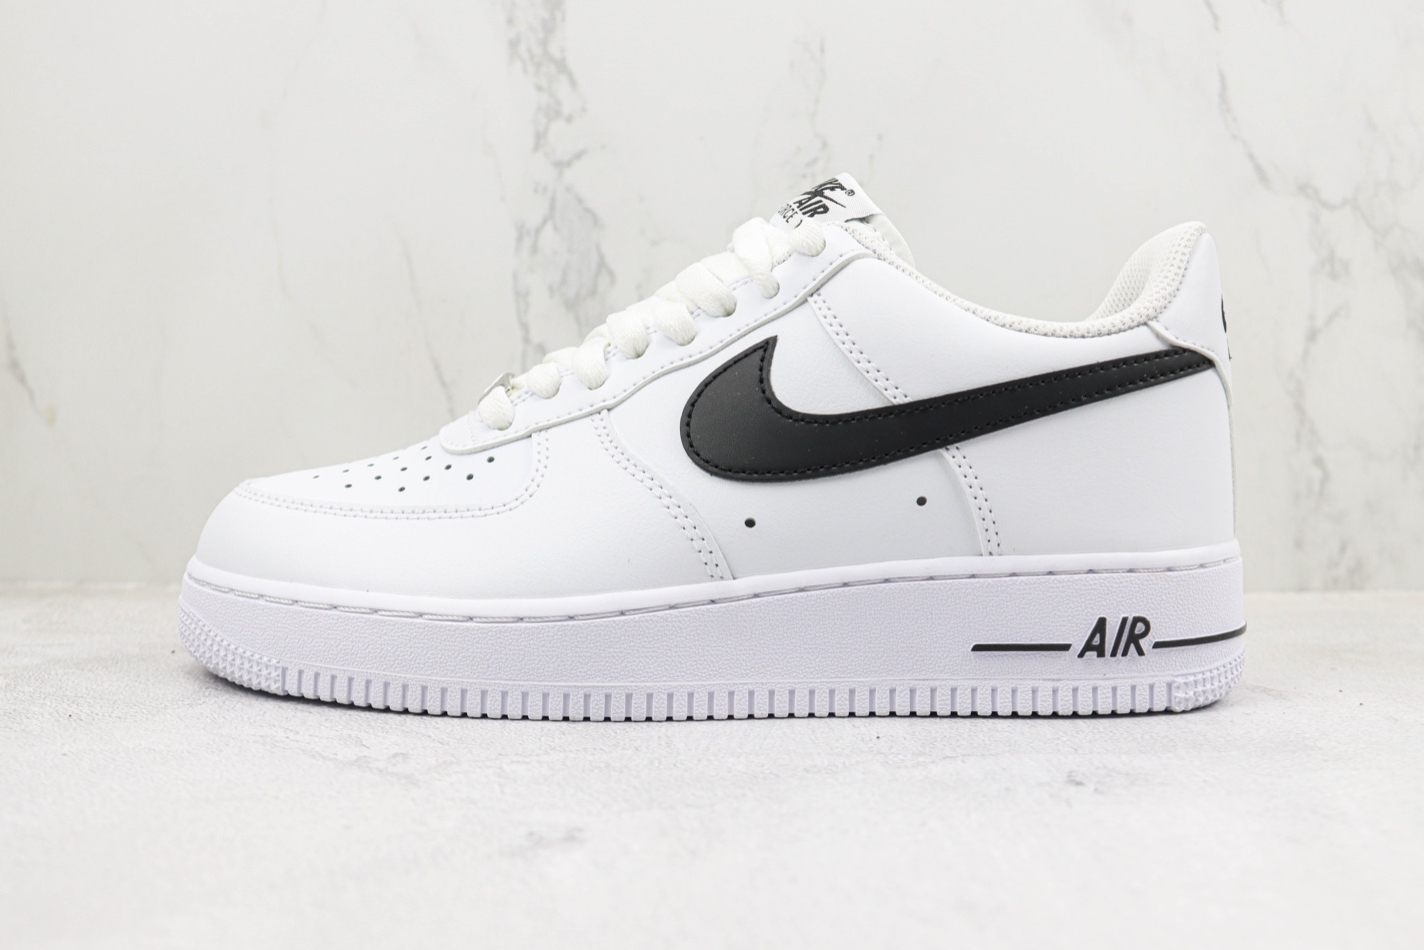 Nike Air Force 1 '07 AN20 White Black CJ0952-100 - Stylish and Classic Sneakers.